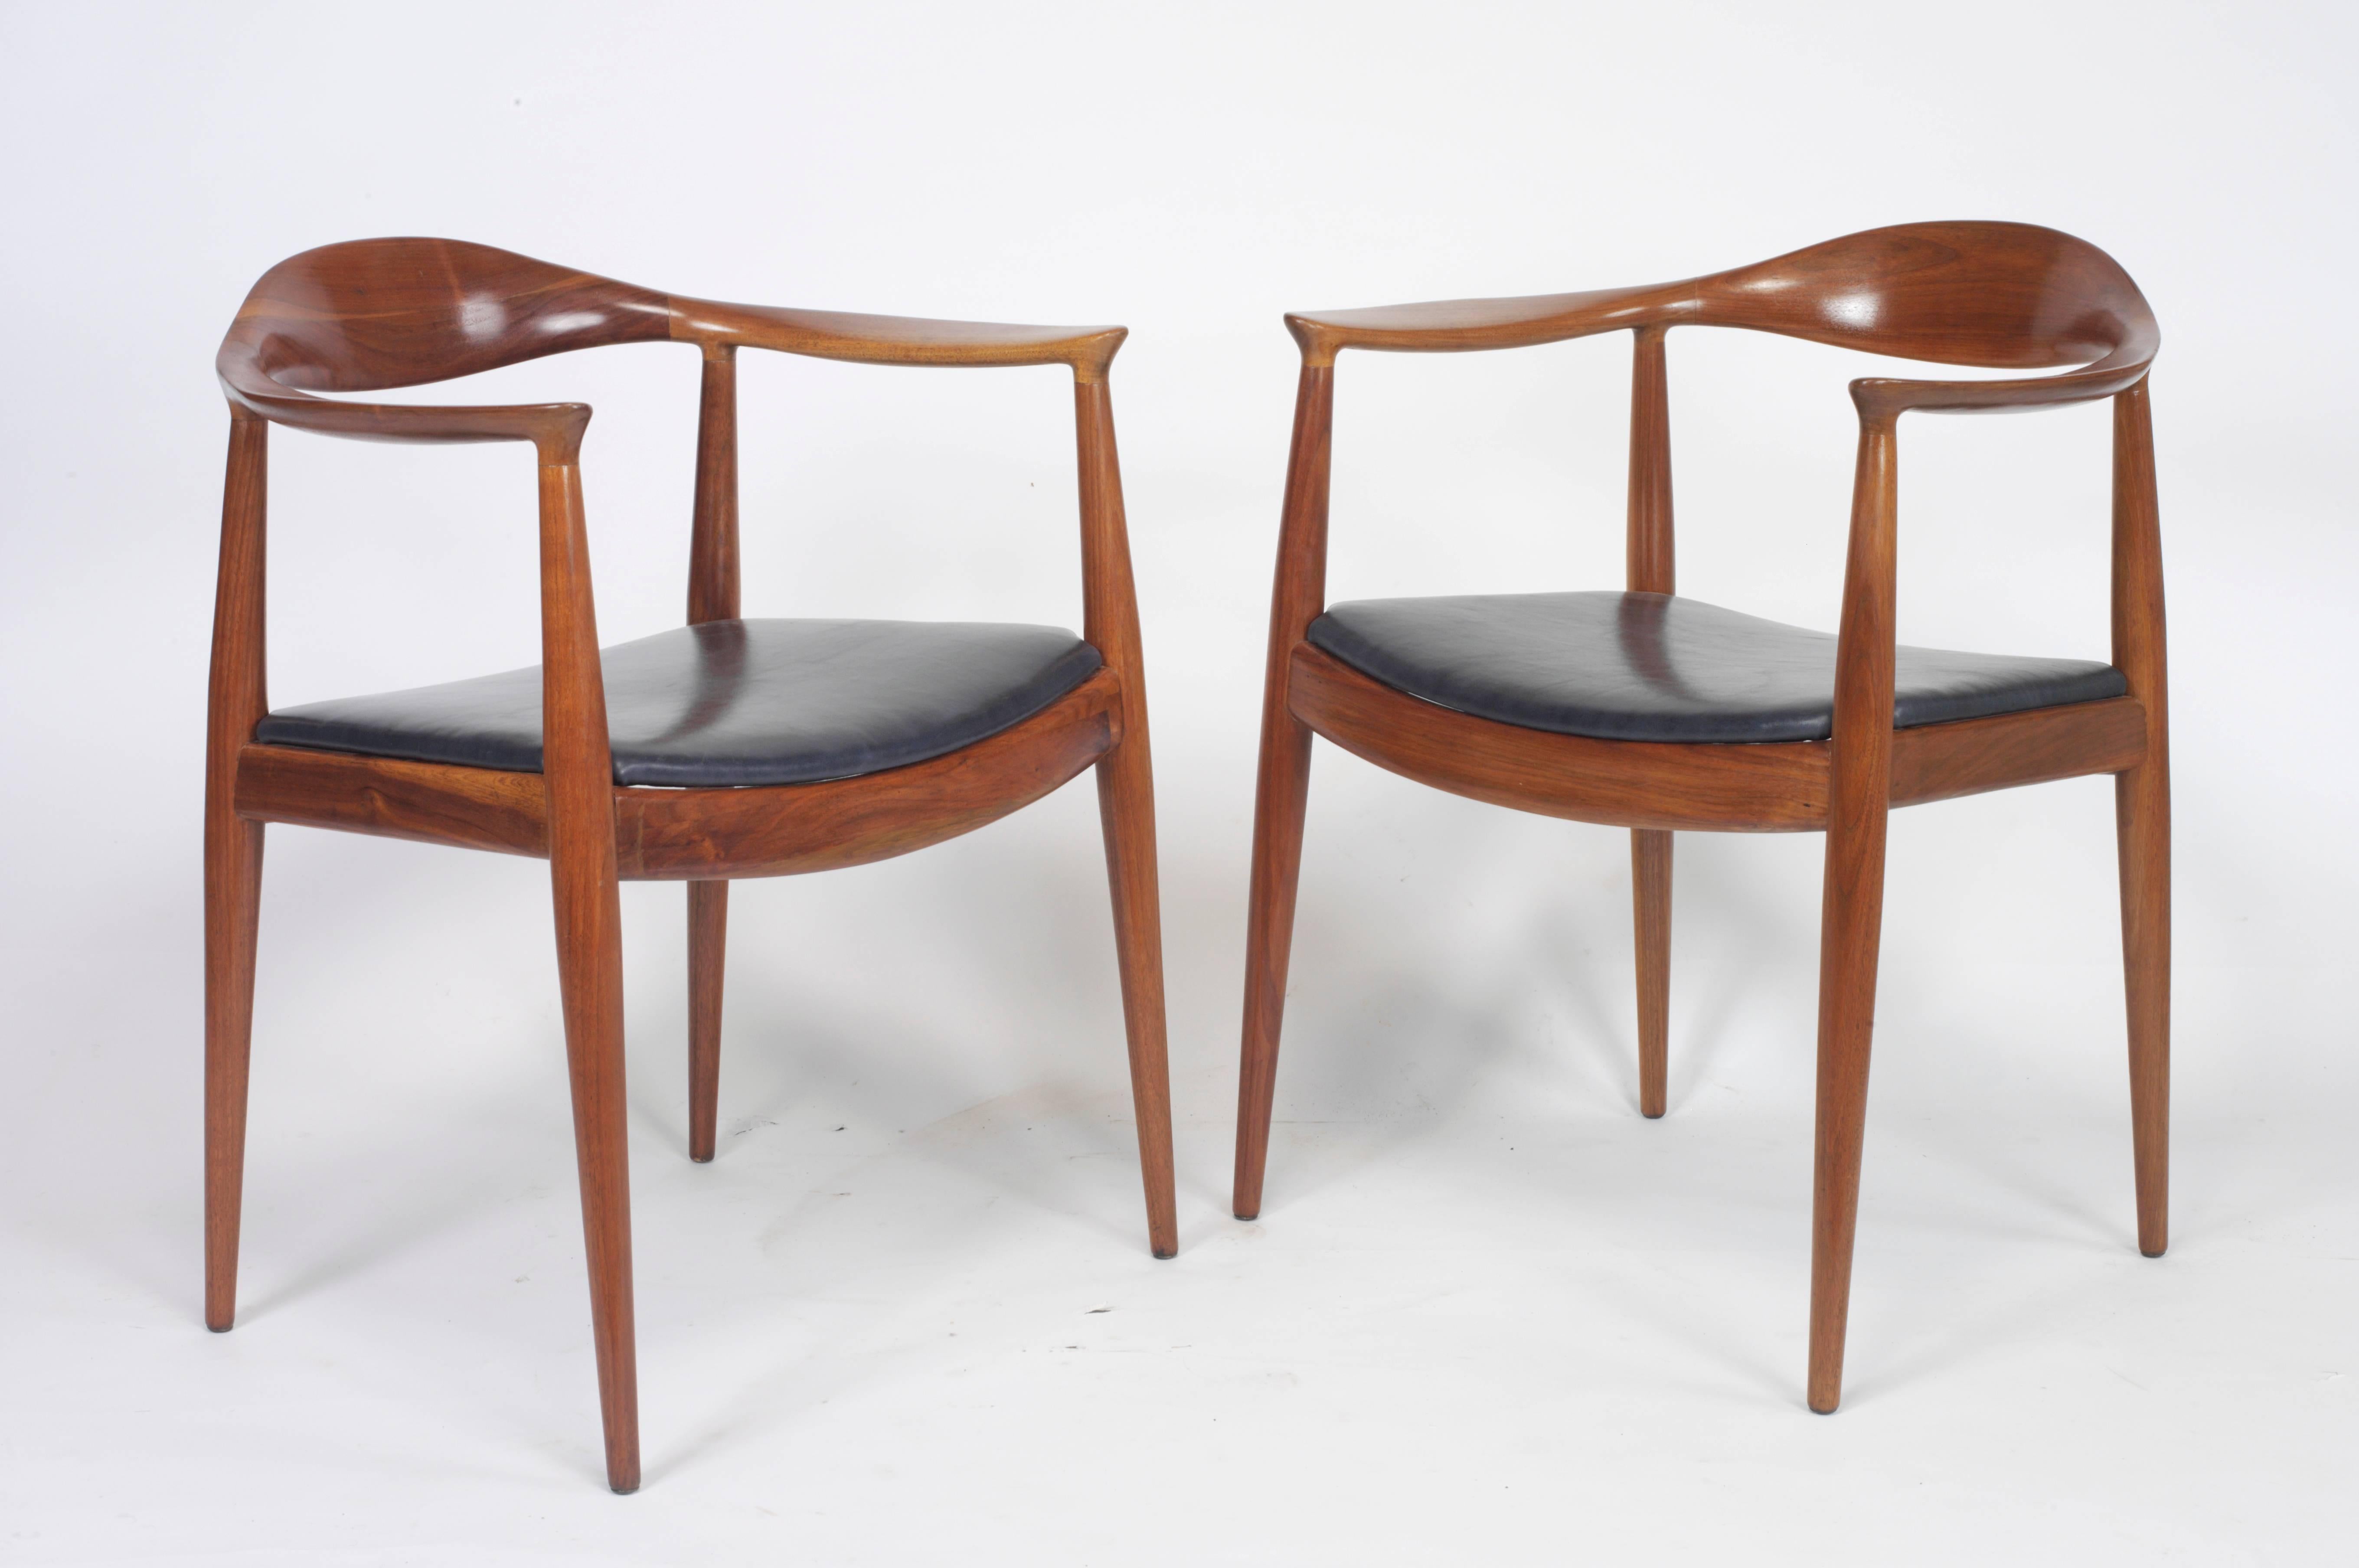 Pair of round chairs designed by Hans J Wegner.
Finished in teak with new blue leather upholstery.